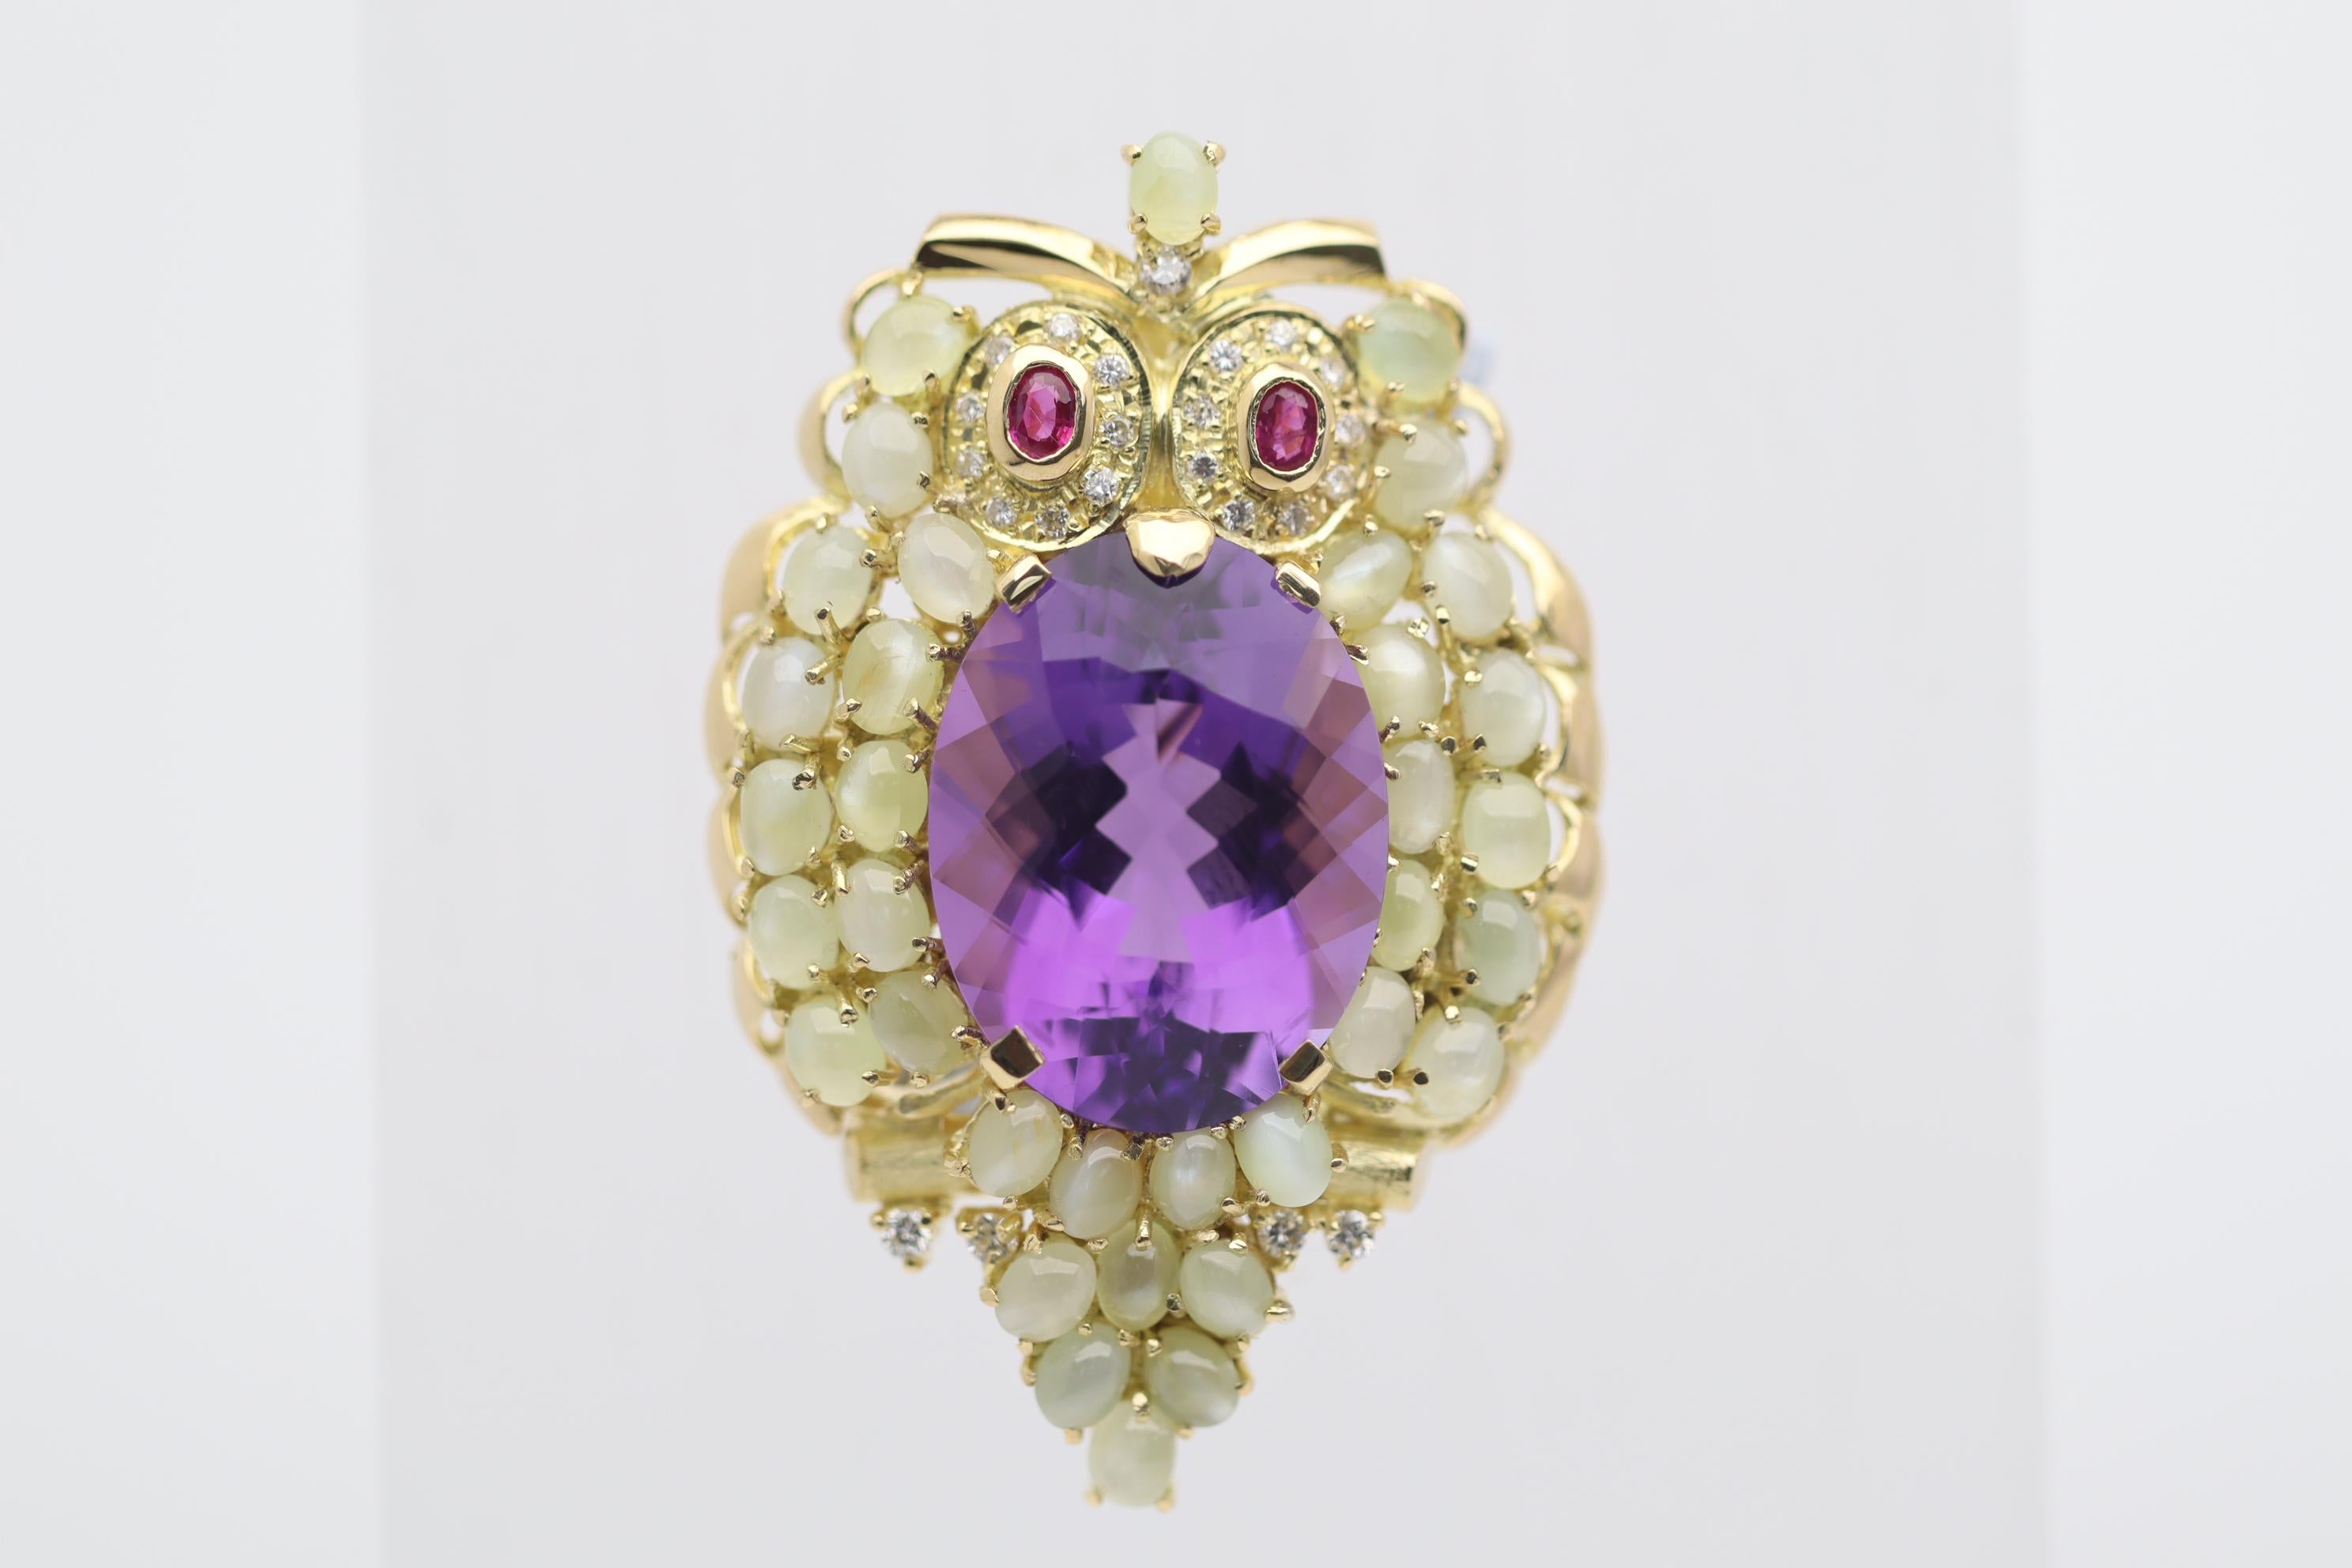 A fine and stylish owl brooch featuring fine and precious gemstones! The center of the own is a 19.30 carat amethyst with a bright rich and clean purple color. Its feathers are multiple cats eye chrysoberyl weighing a total of 11.97 carats. Two